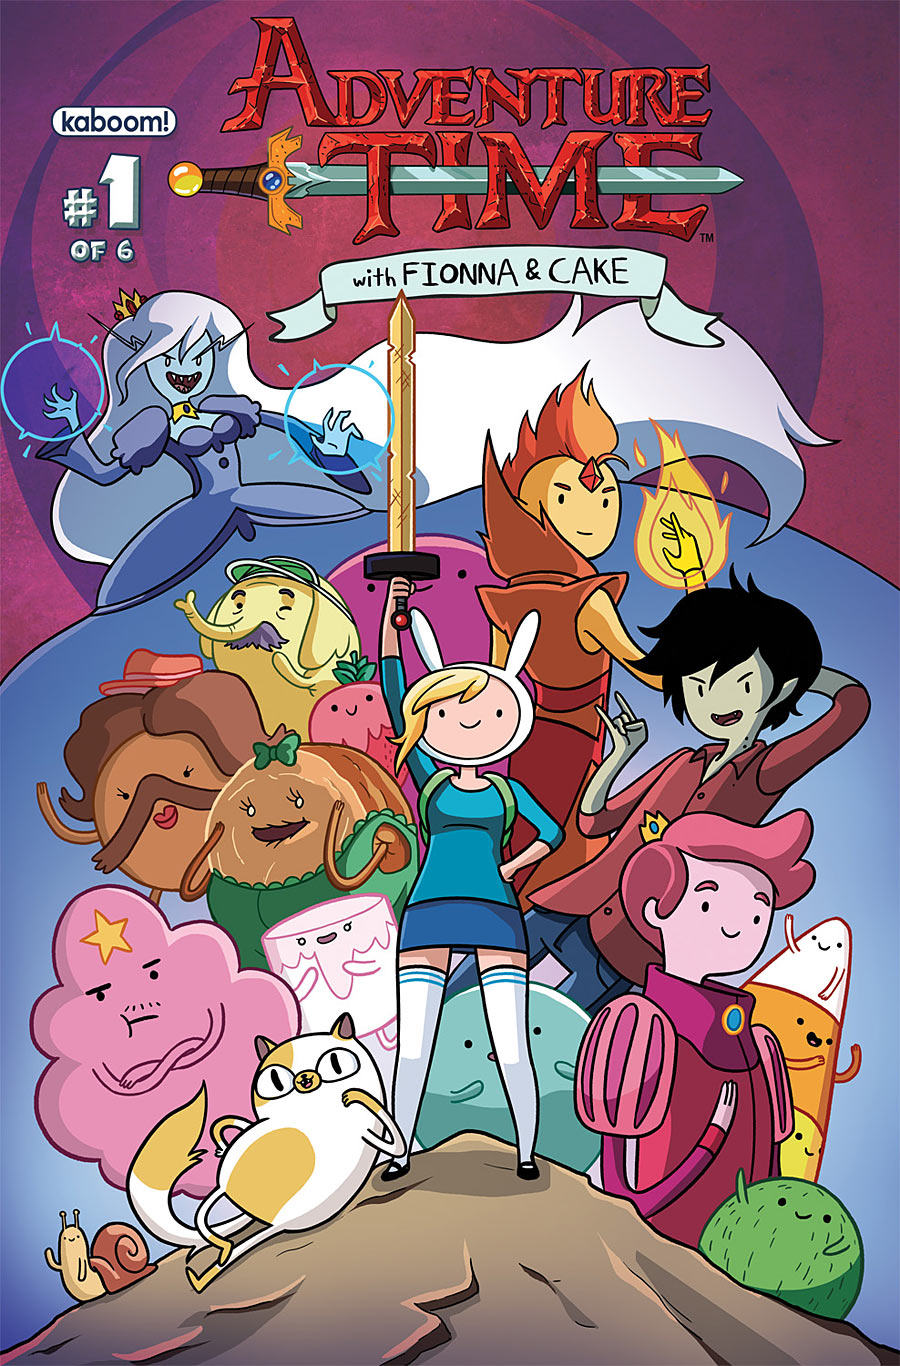 Adventure Time with Fionna and Cake Issue 1 Adventure